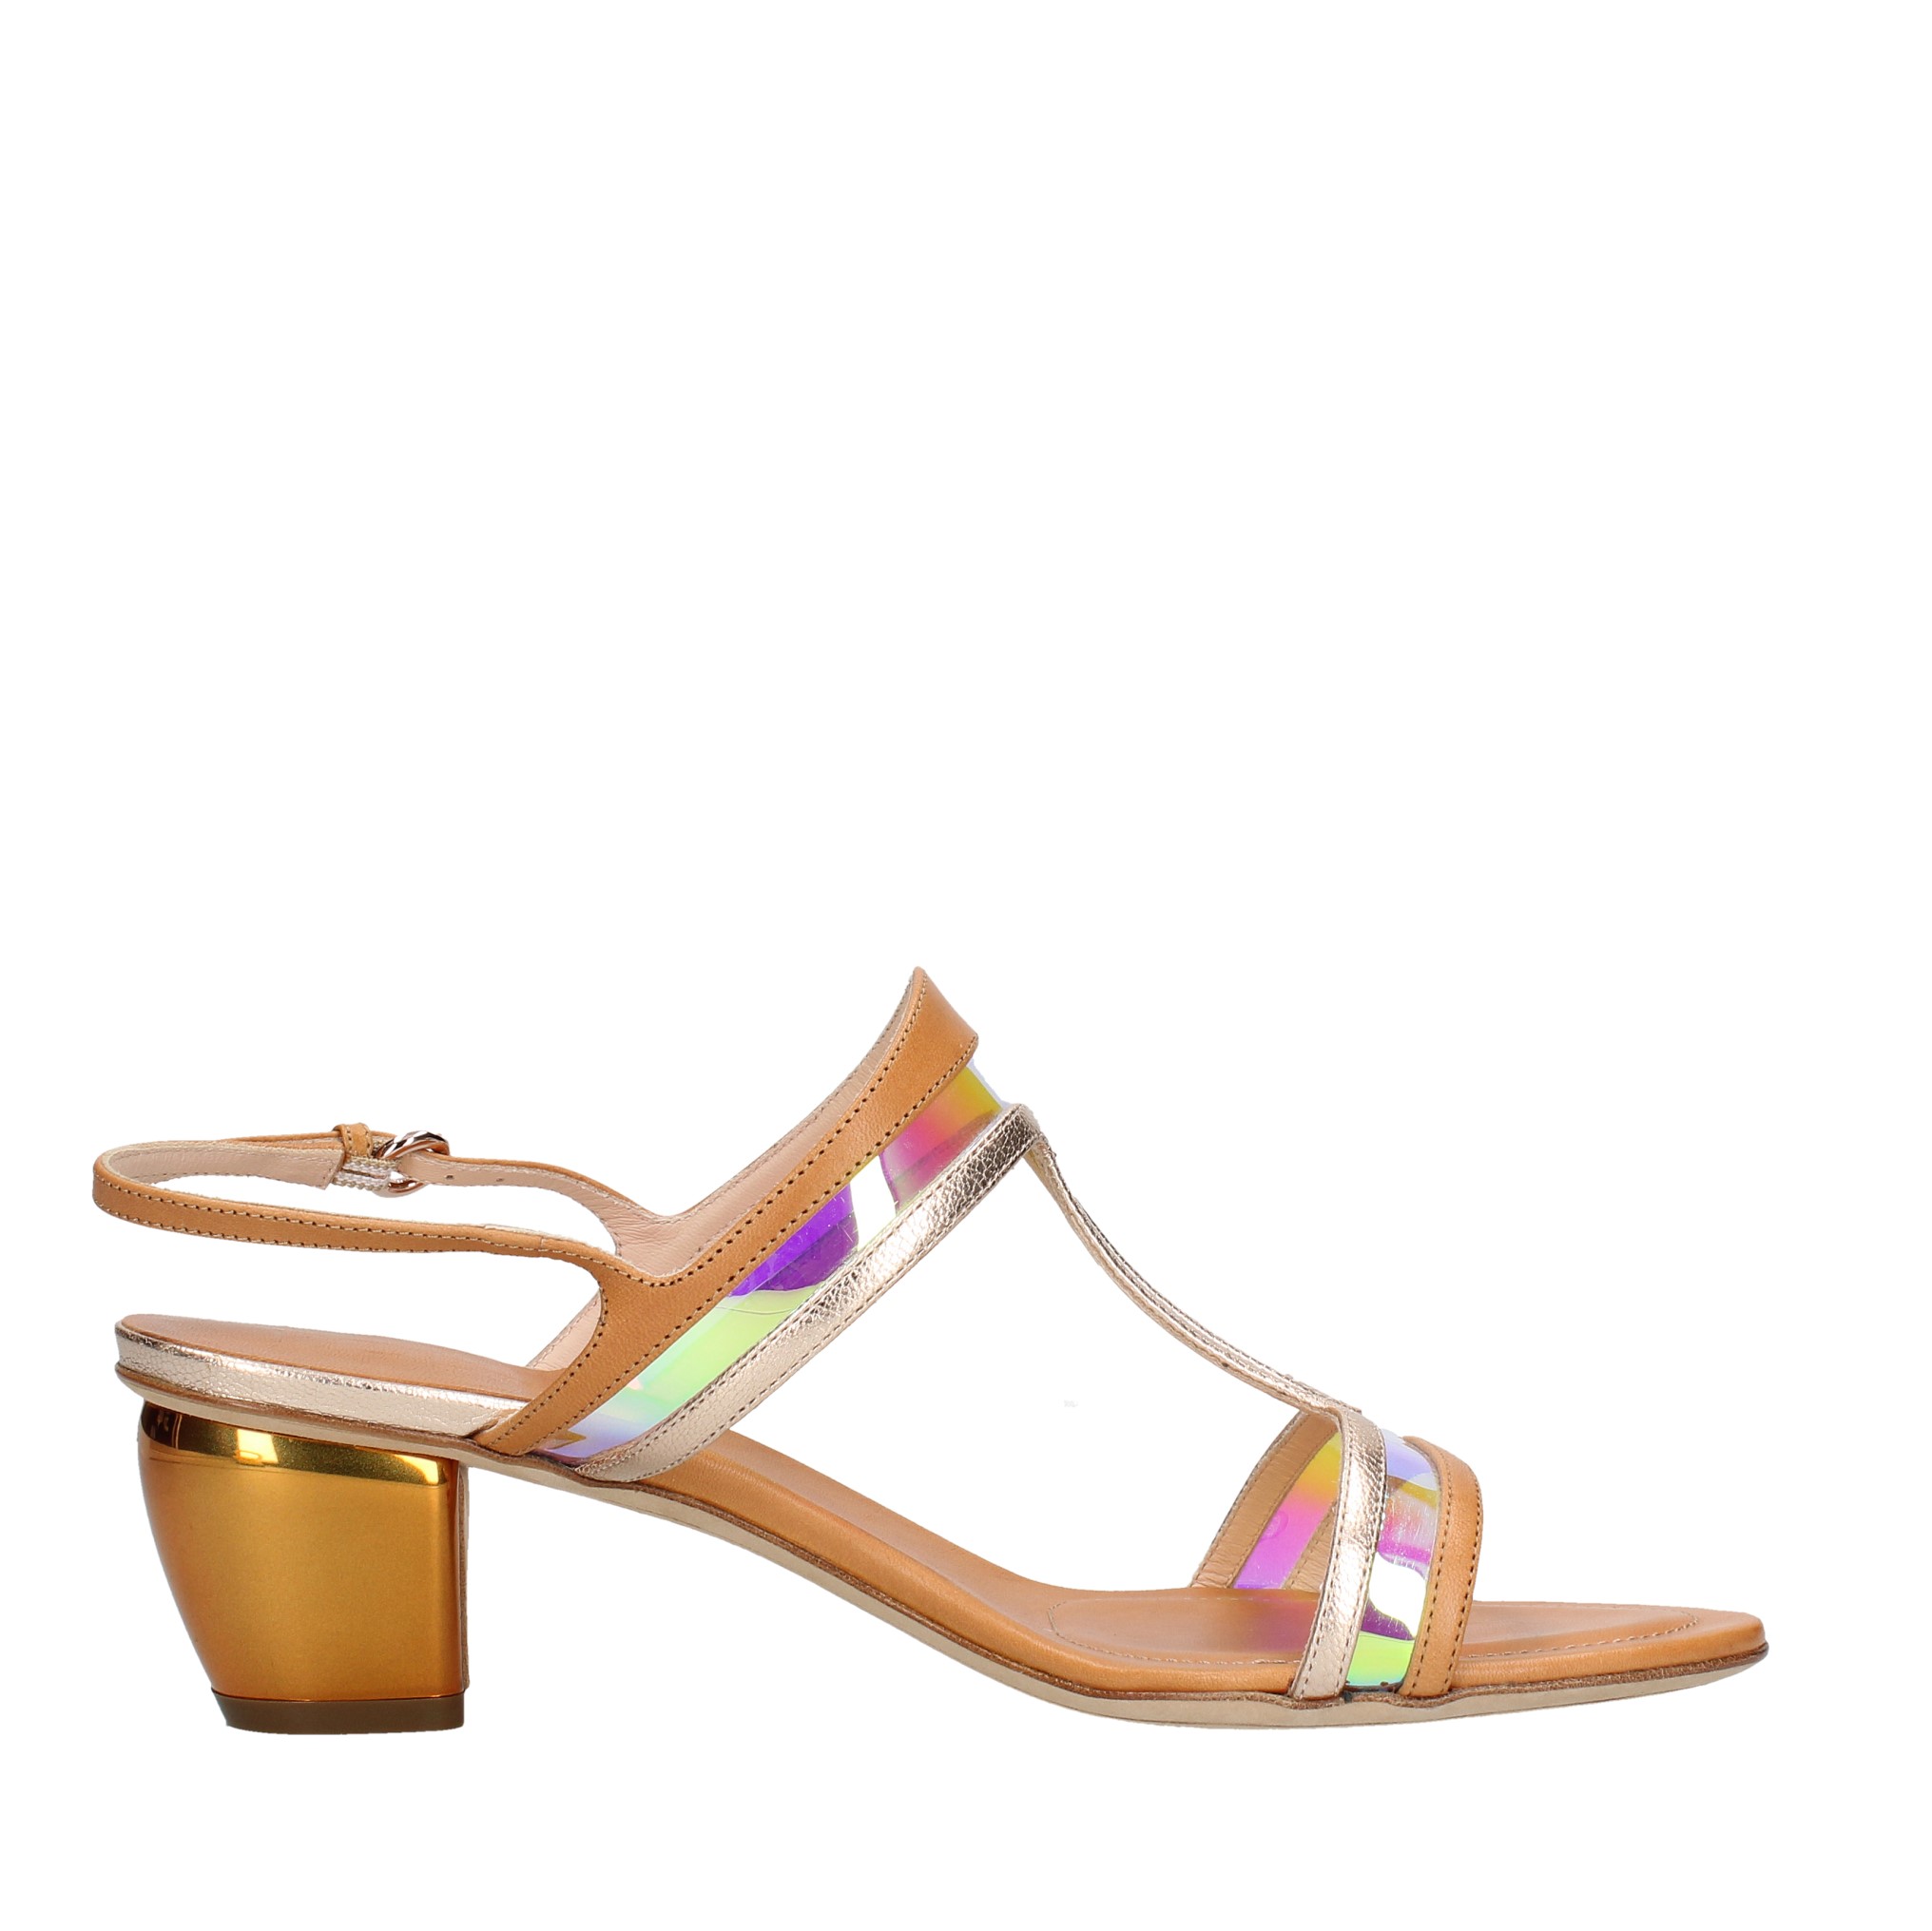 Leather and pvc sandals - RODO - Ginevra calzature